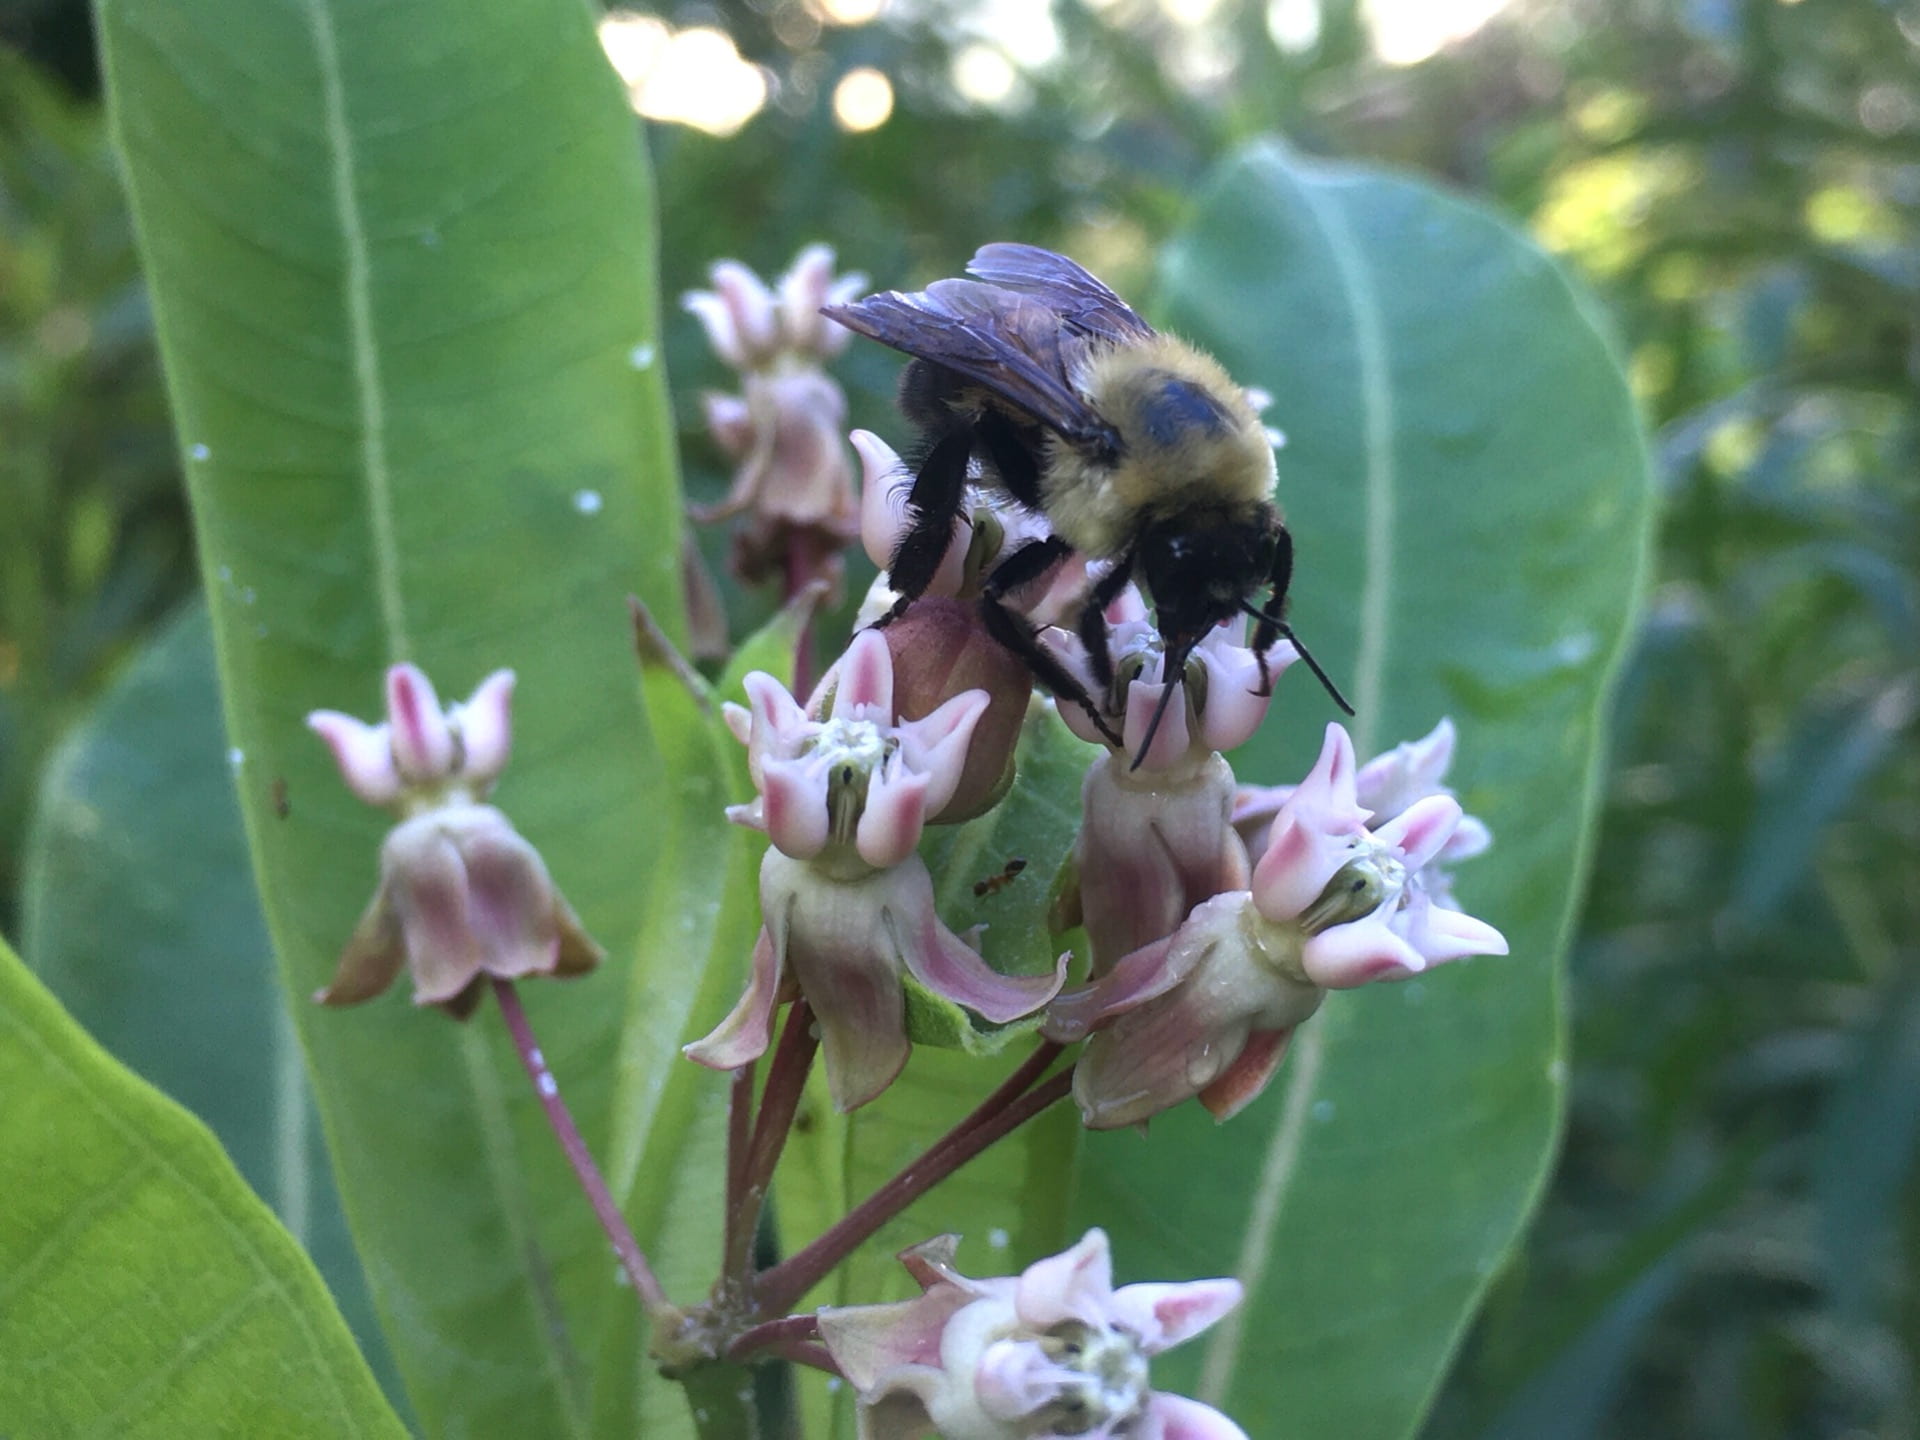 A bumble bee stopping to gather nectar at Asclepias syriaca.